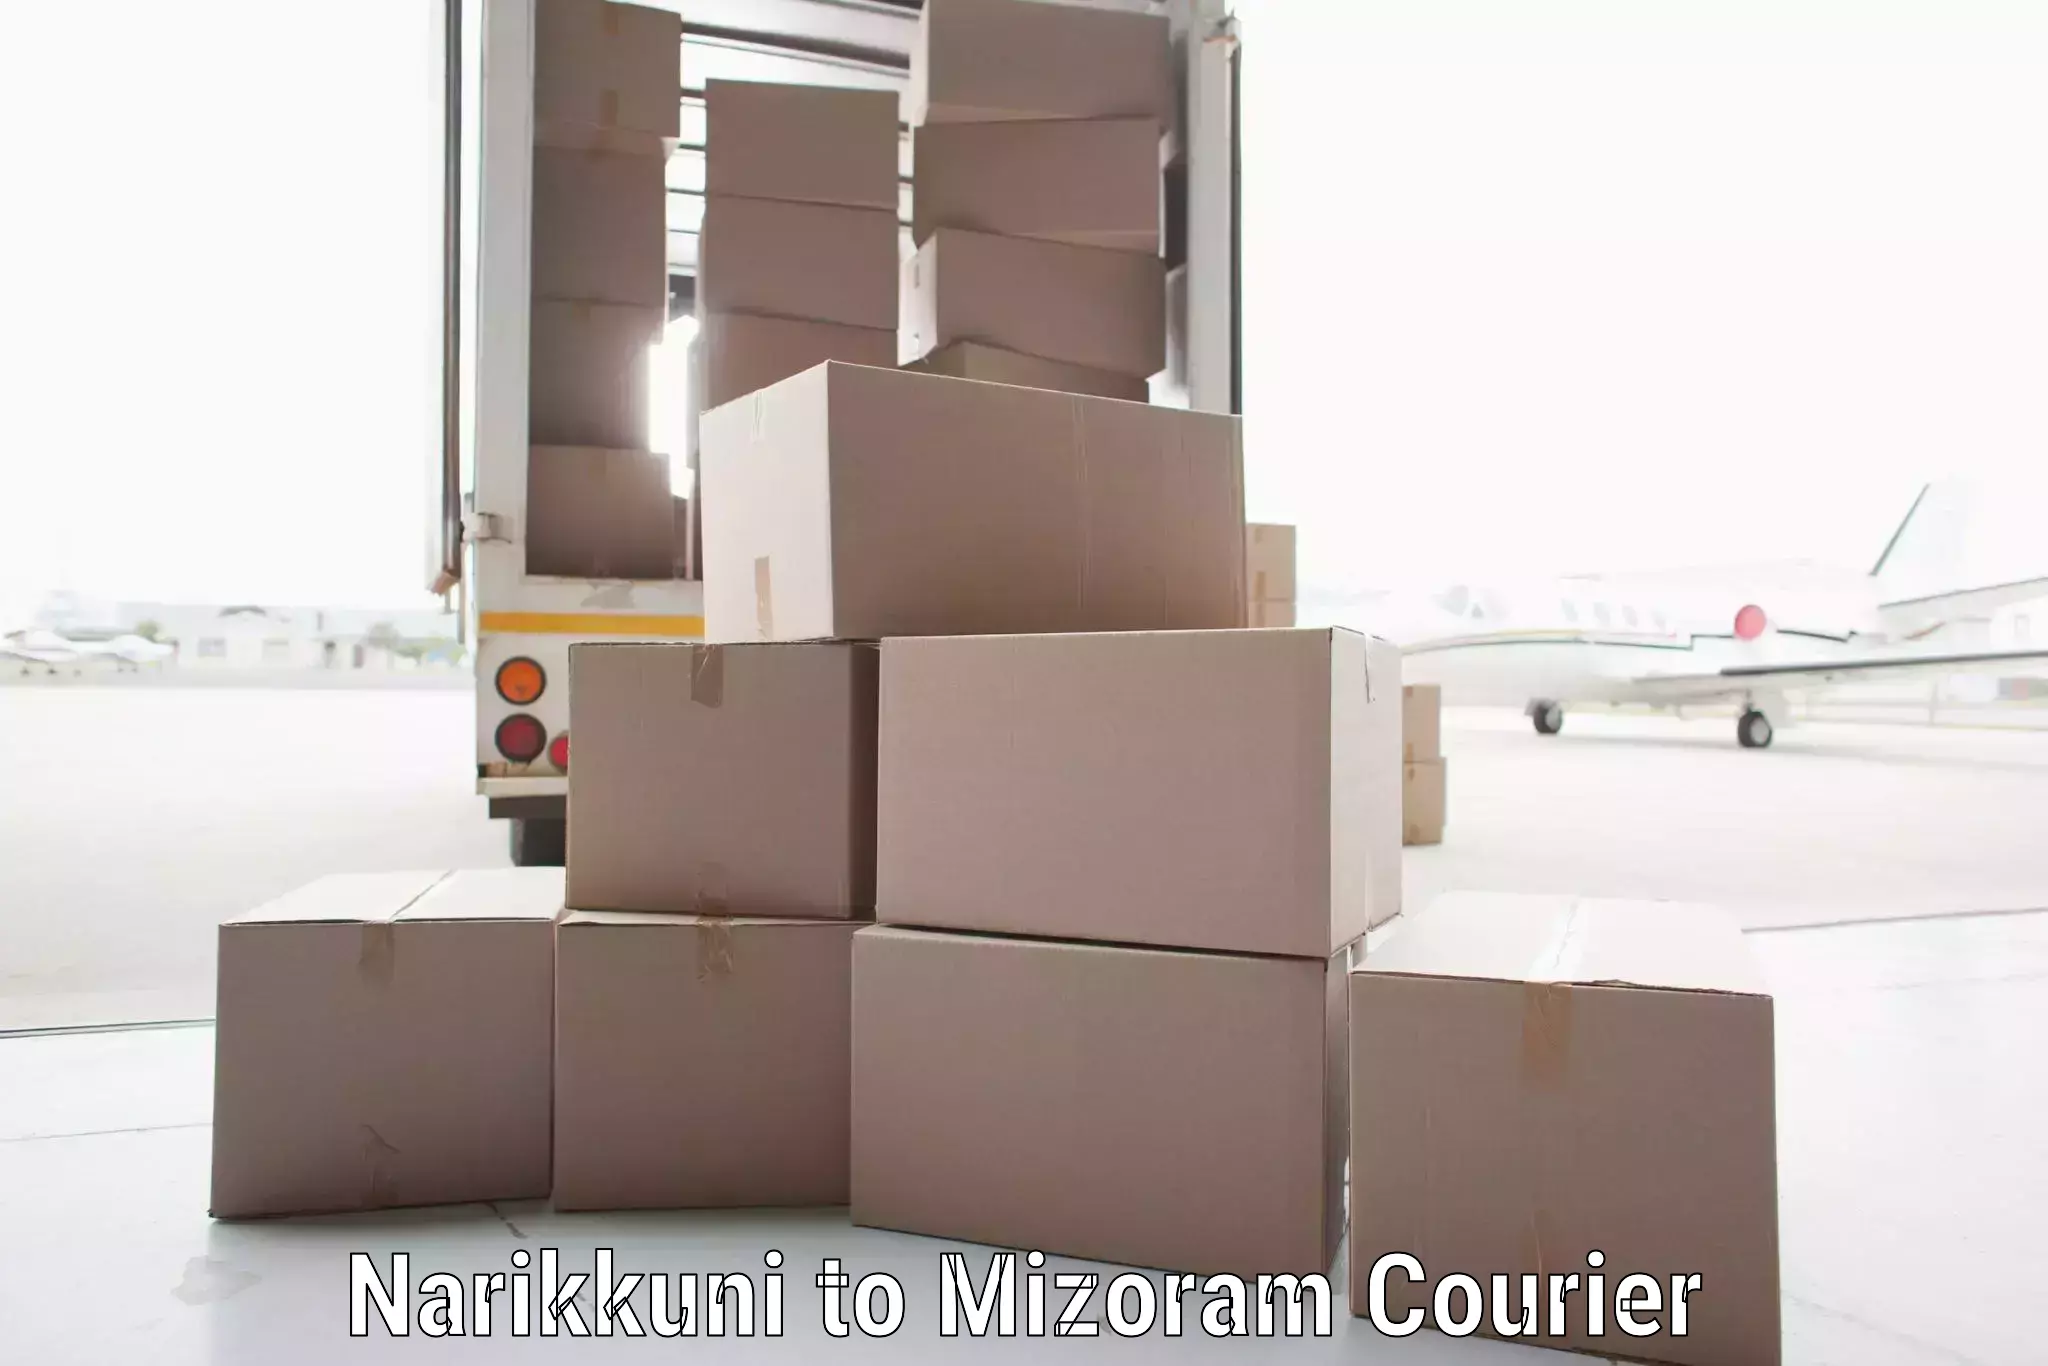 Flexible delivery schedules Narikkuni to Darlawn